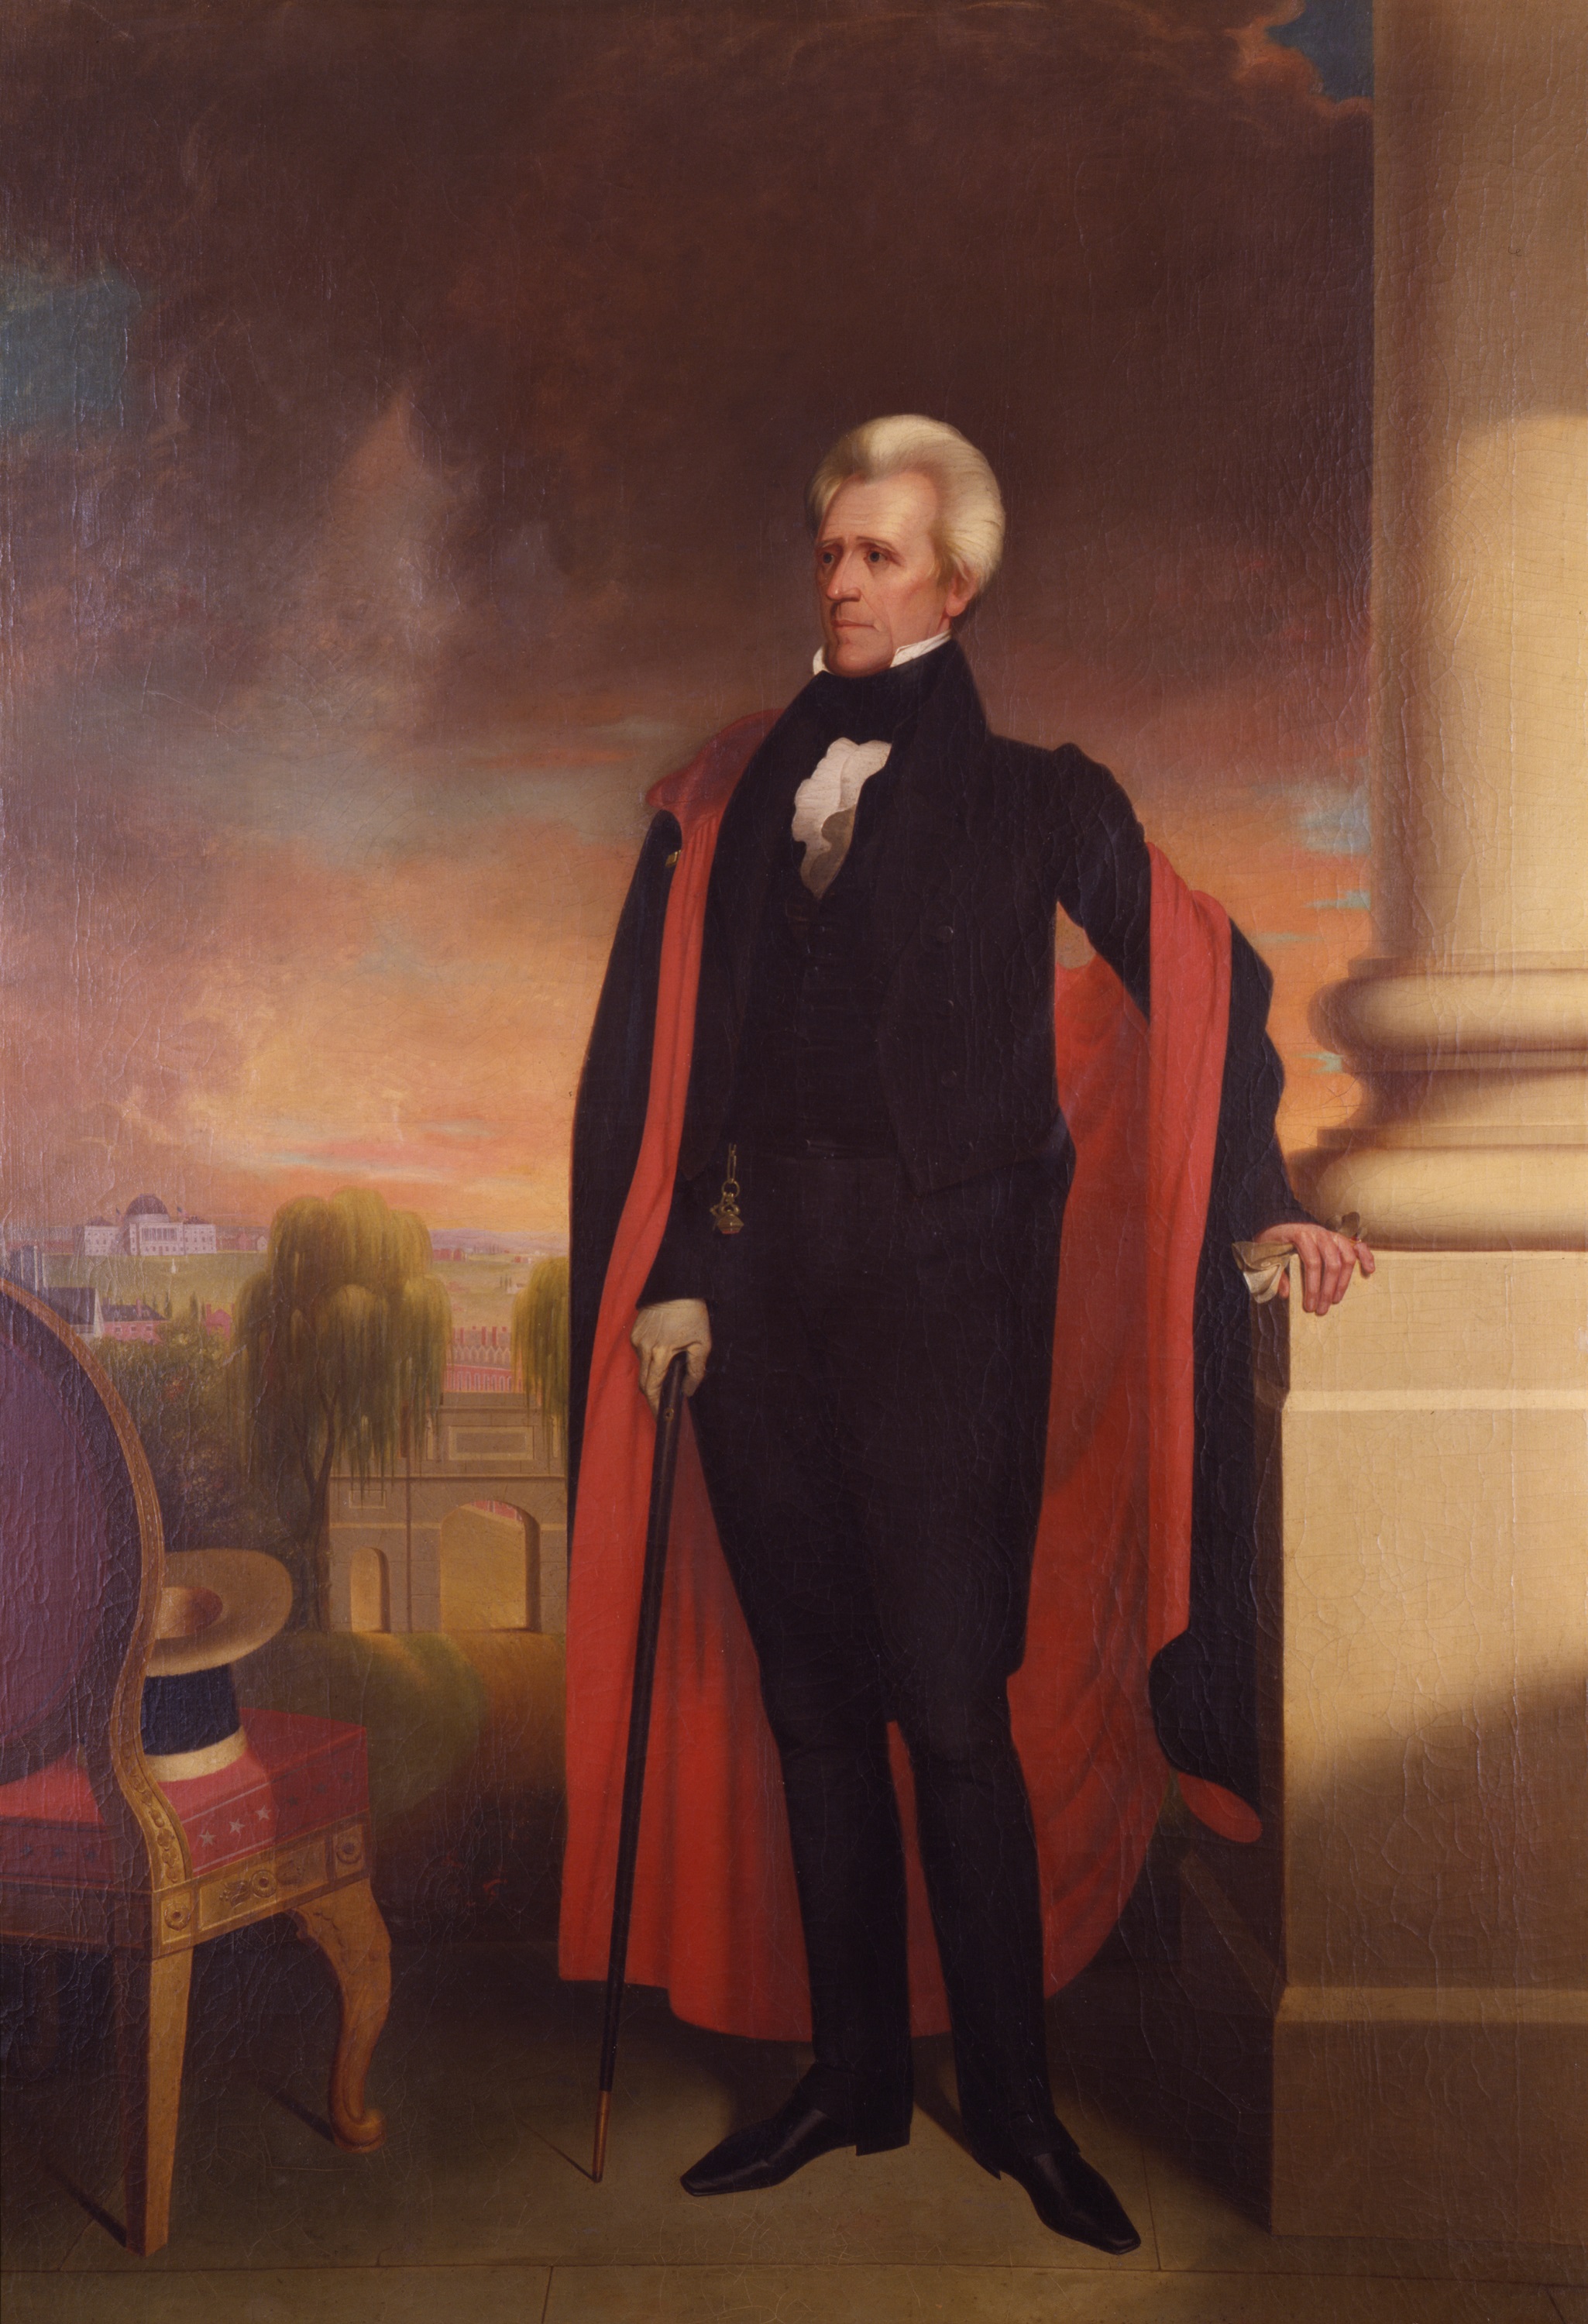 Painting of a white-haired man wearing black clothing and a red cape leaning against a white column